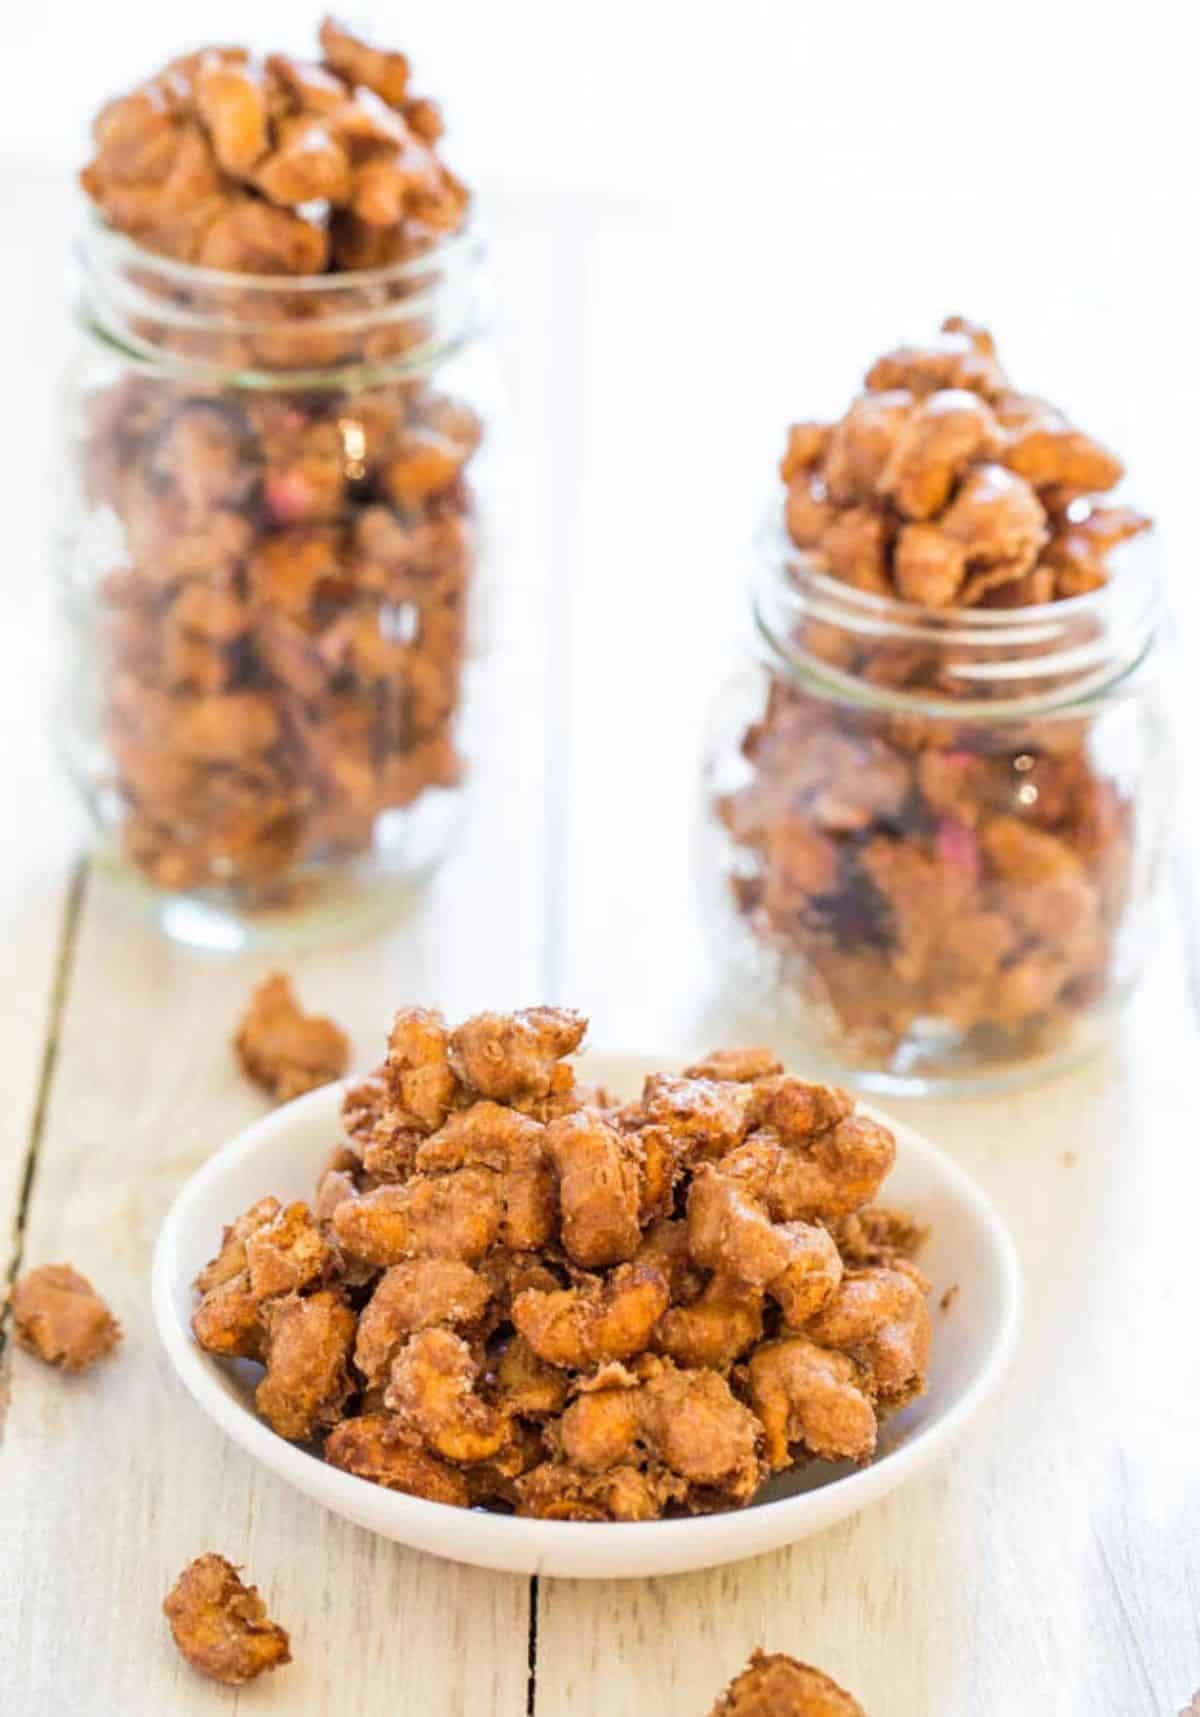 Cinnamon Sugar Candied Cashews in a white bowl and two glass jars.